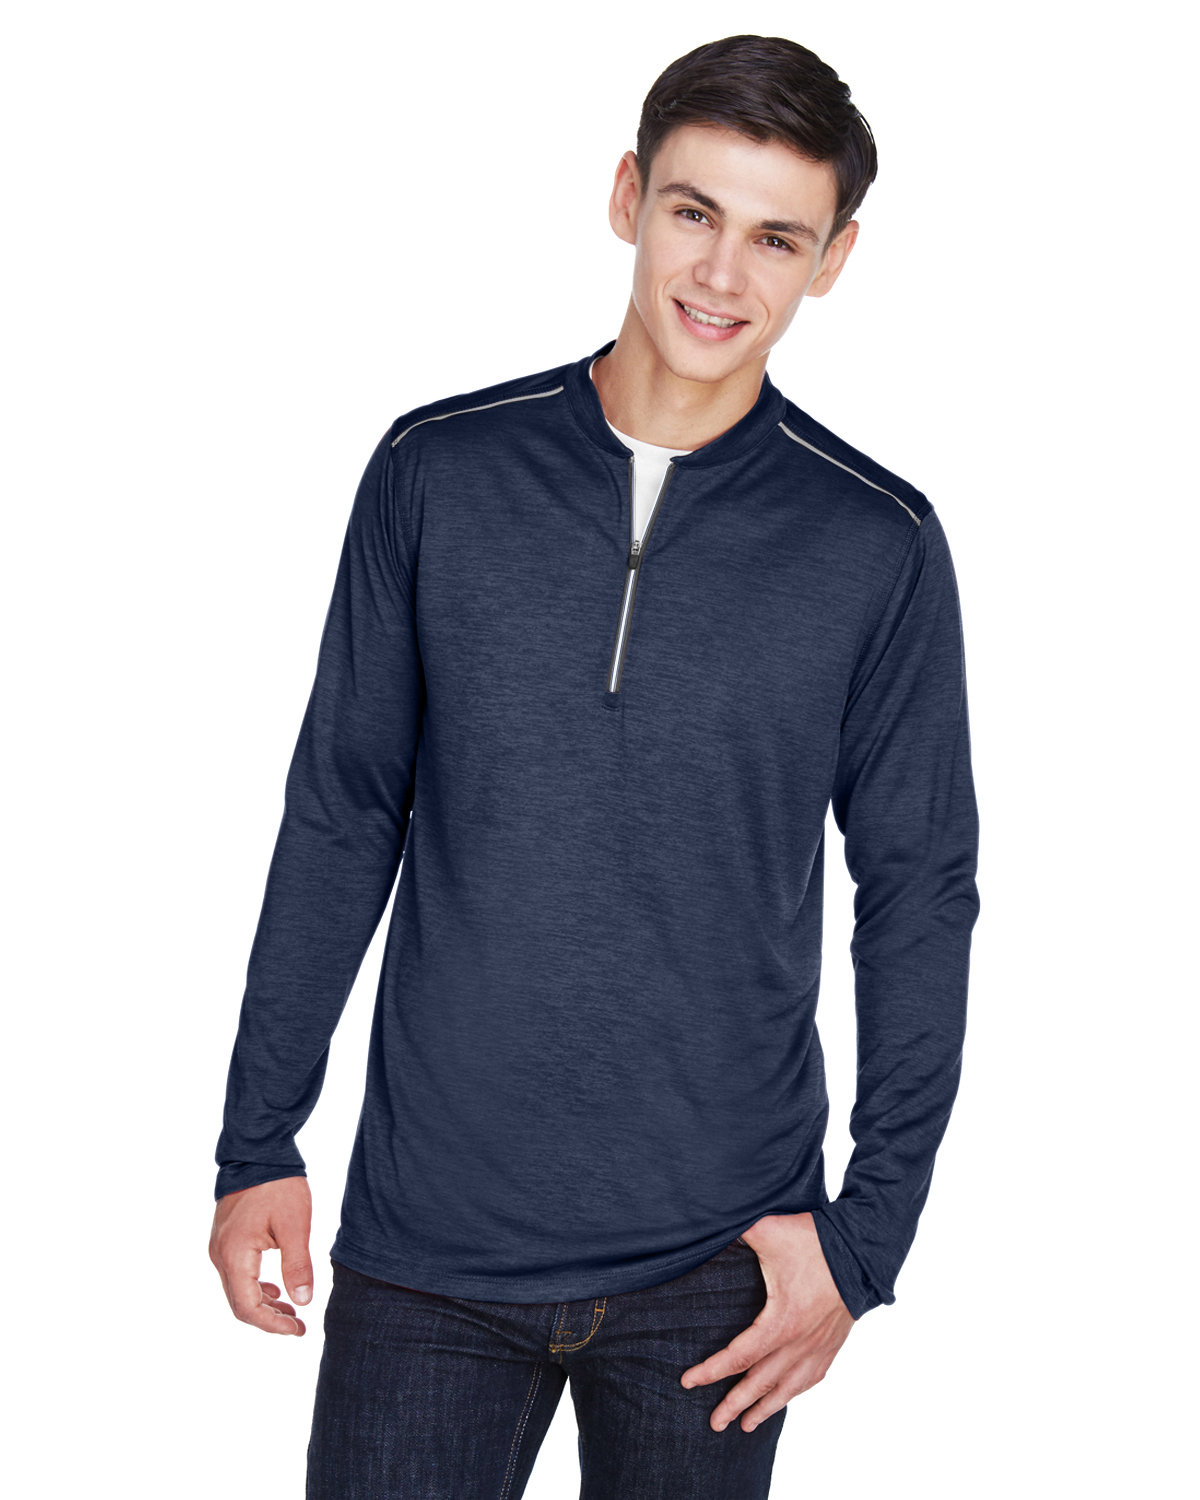 Core 365 Men's Tall Kinetic Performance Quarter-Zip CLS NVY HT/ CRBN 